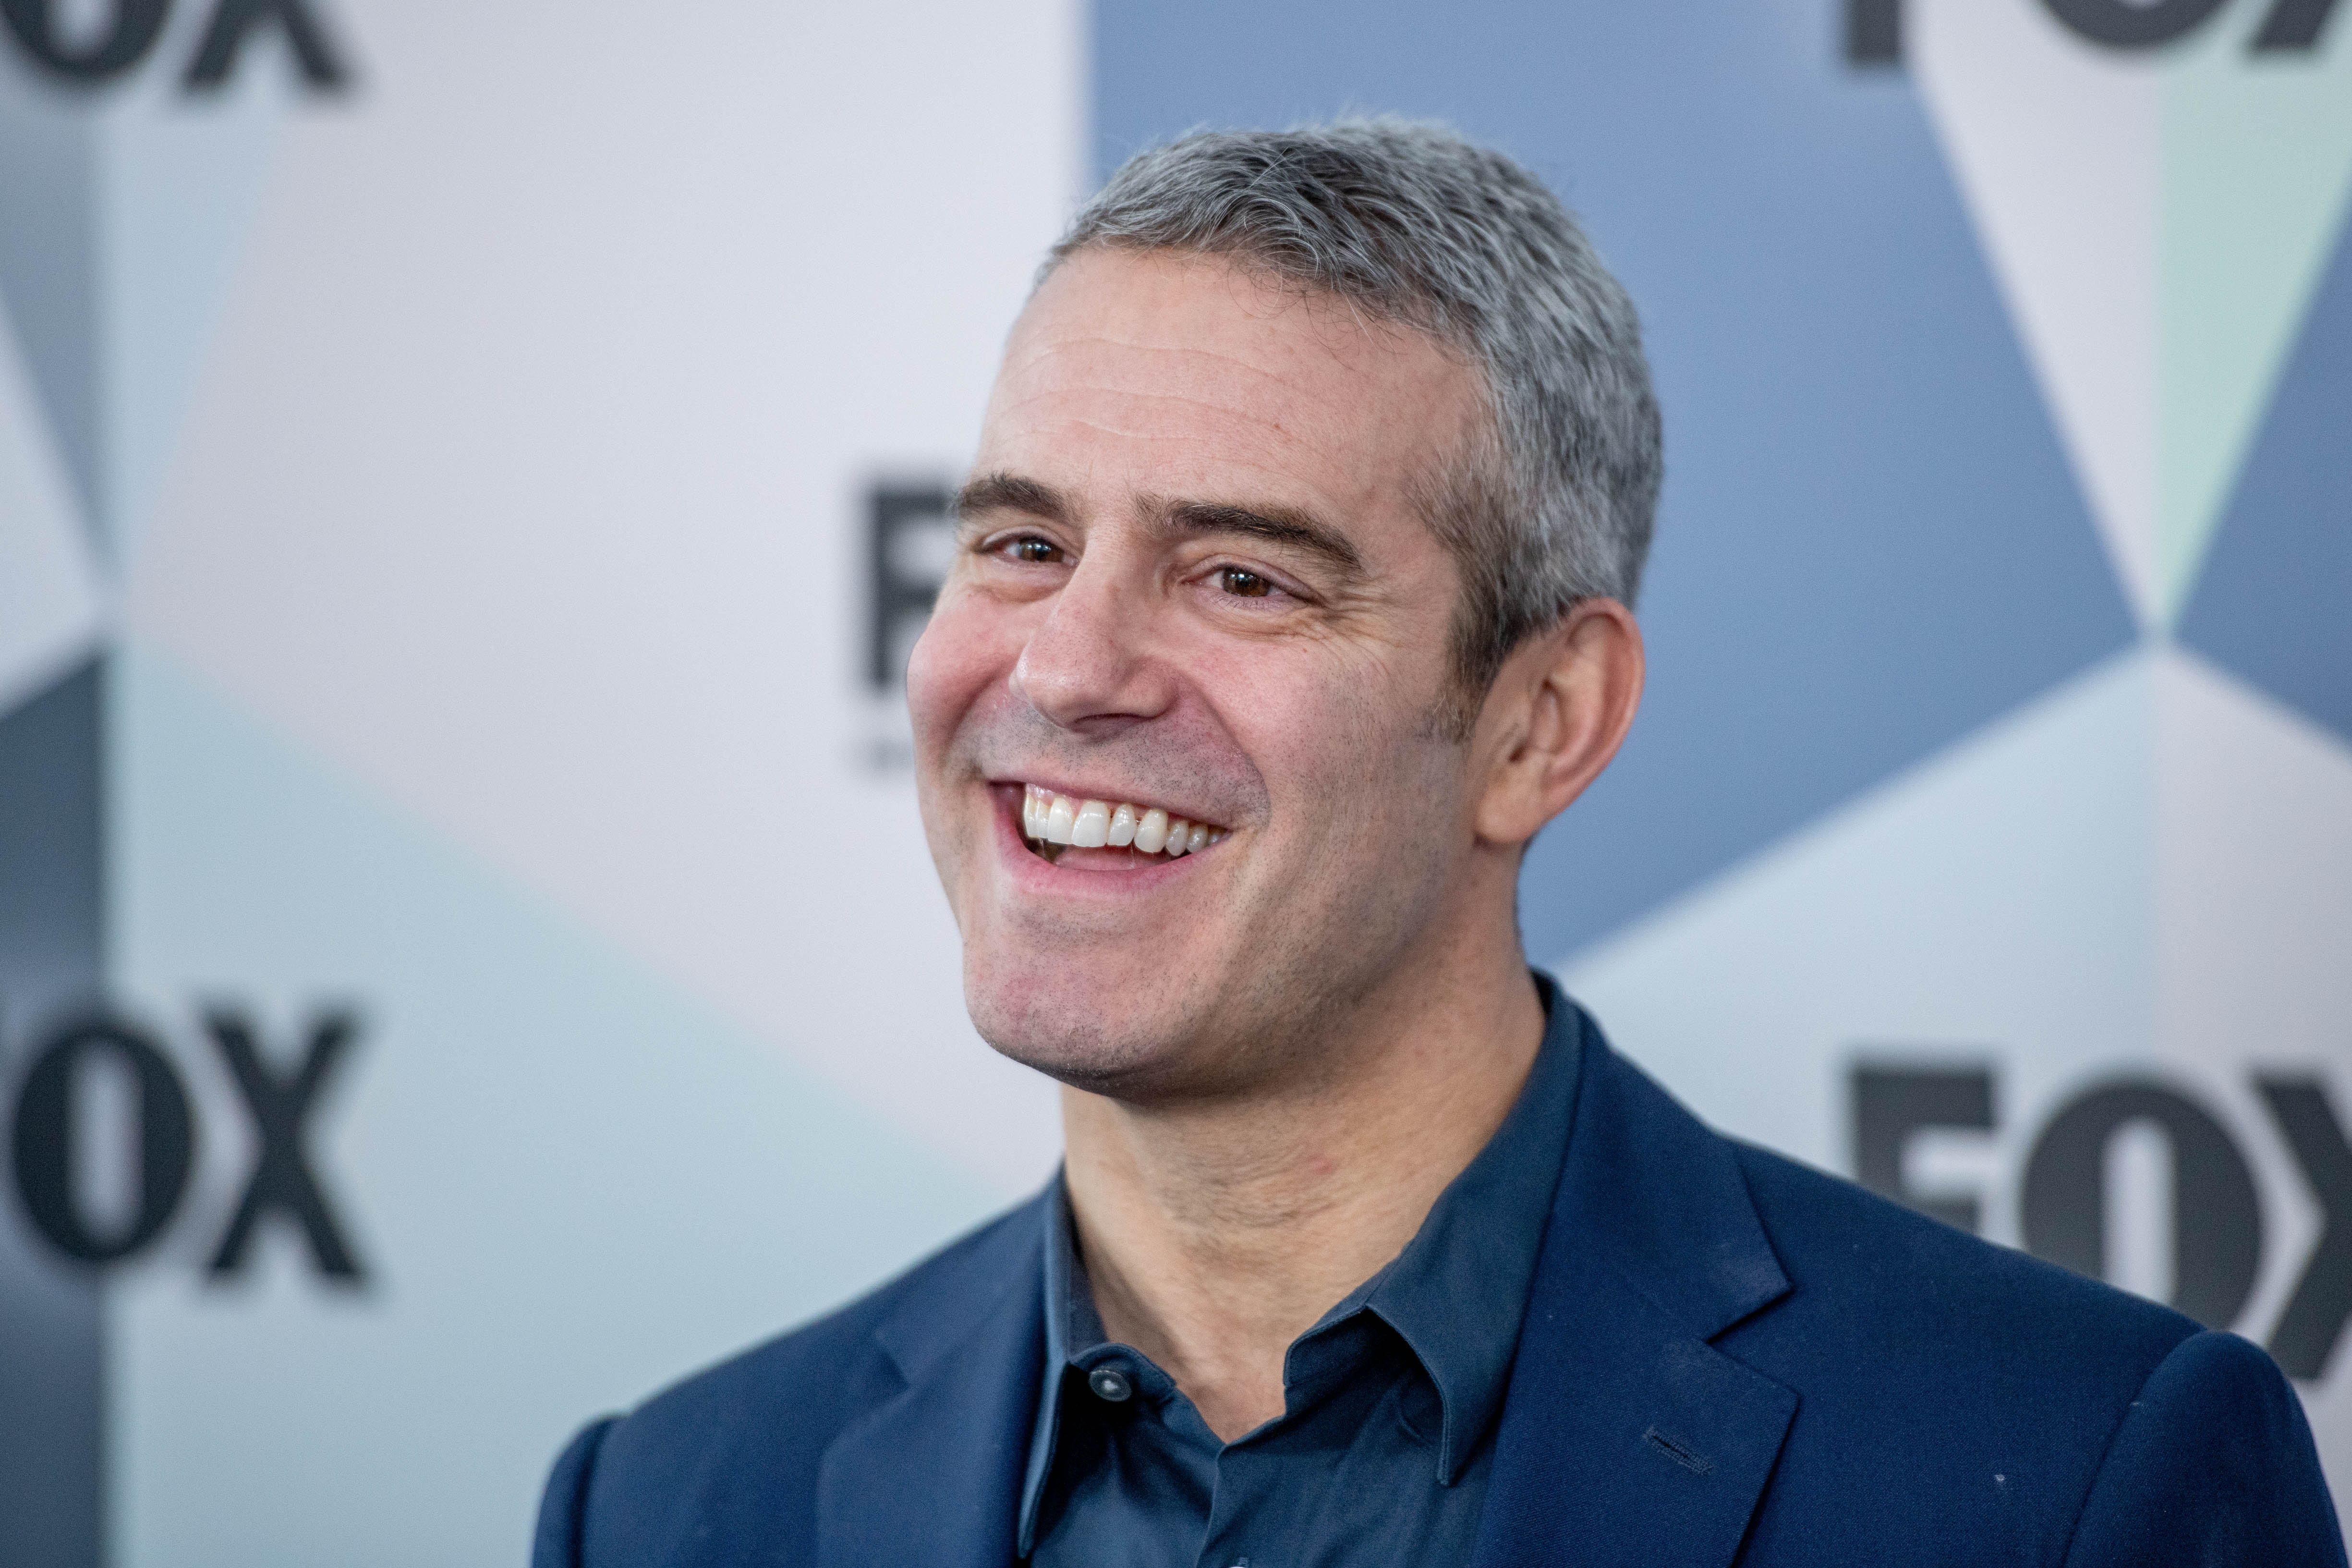 Andy Cohen at the 2018 Fox Network Upfront in New York. | Photo: Getty Images